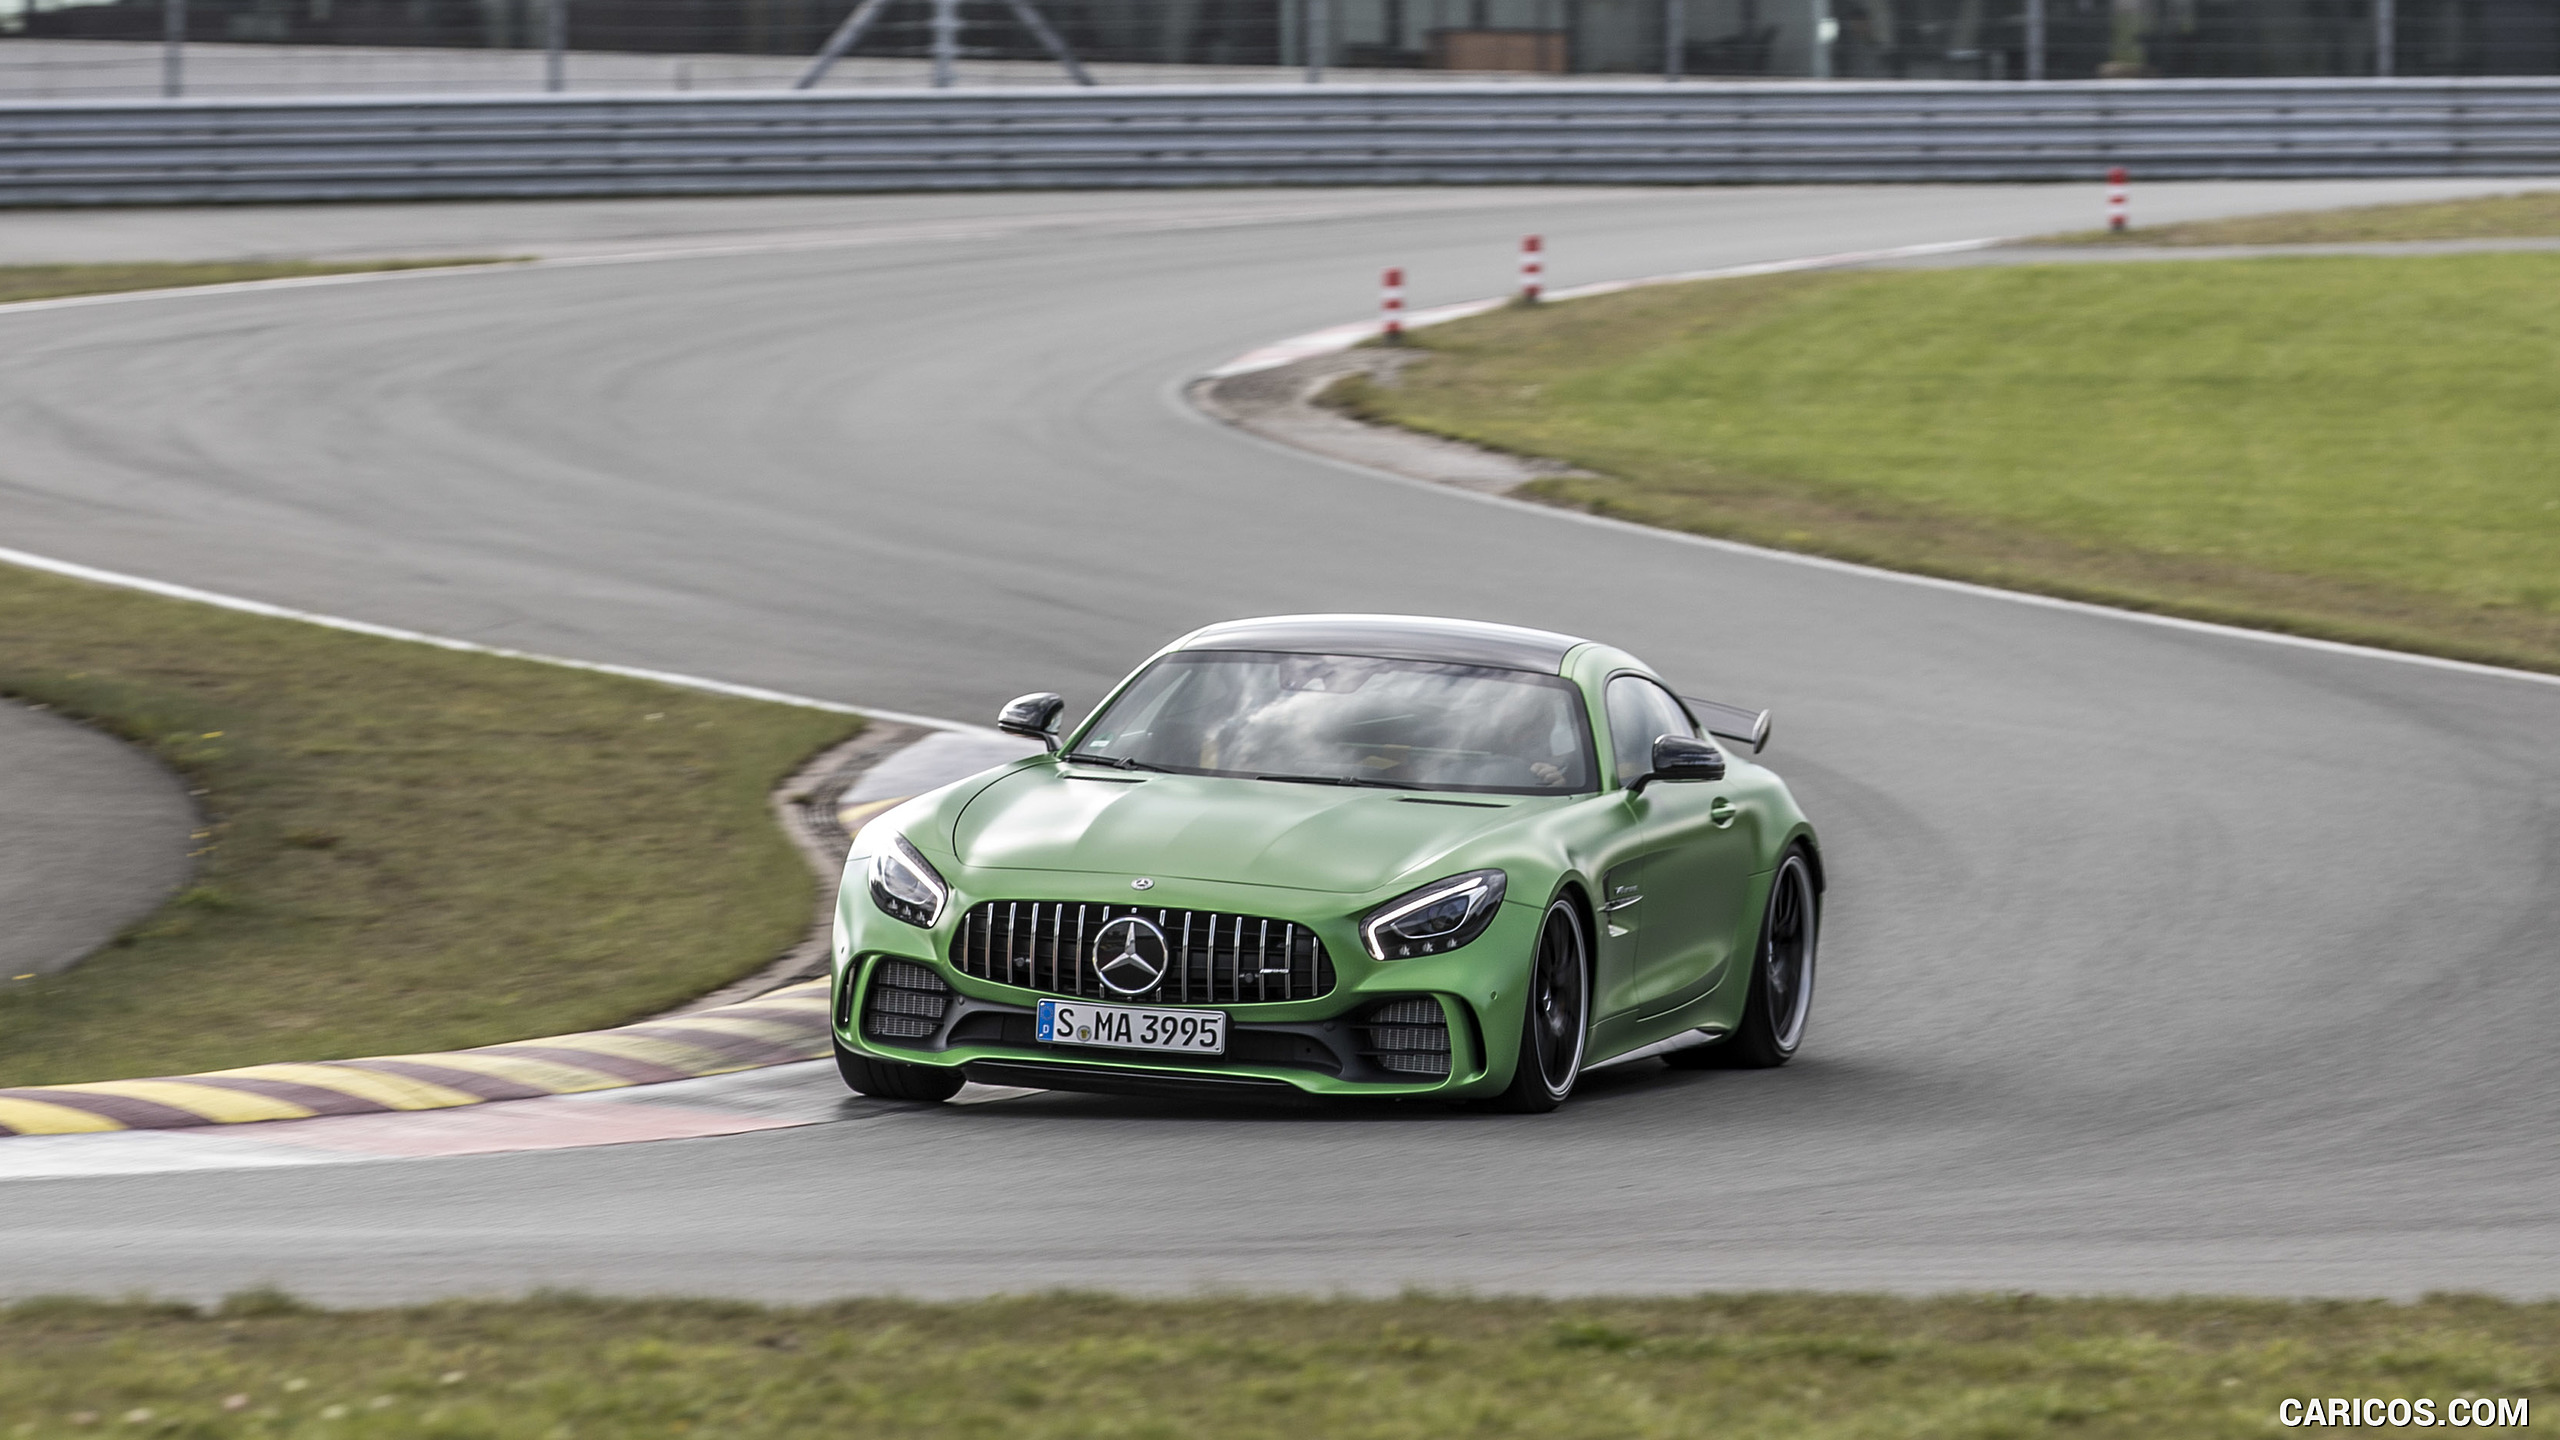 2017 Mercedes-AMG GT R Coupe - Front, #155 of 182